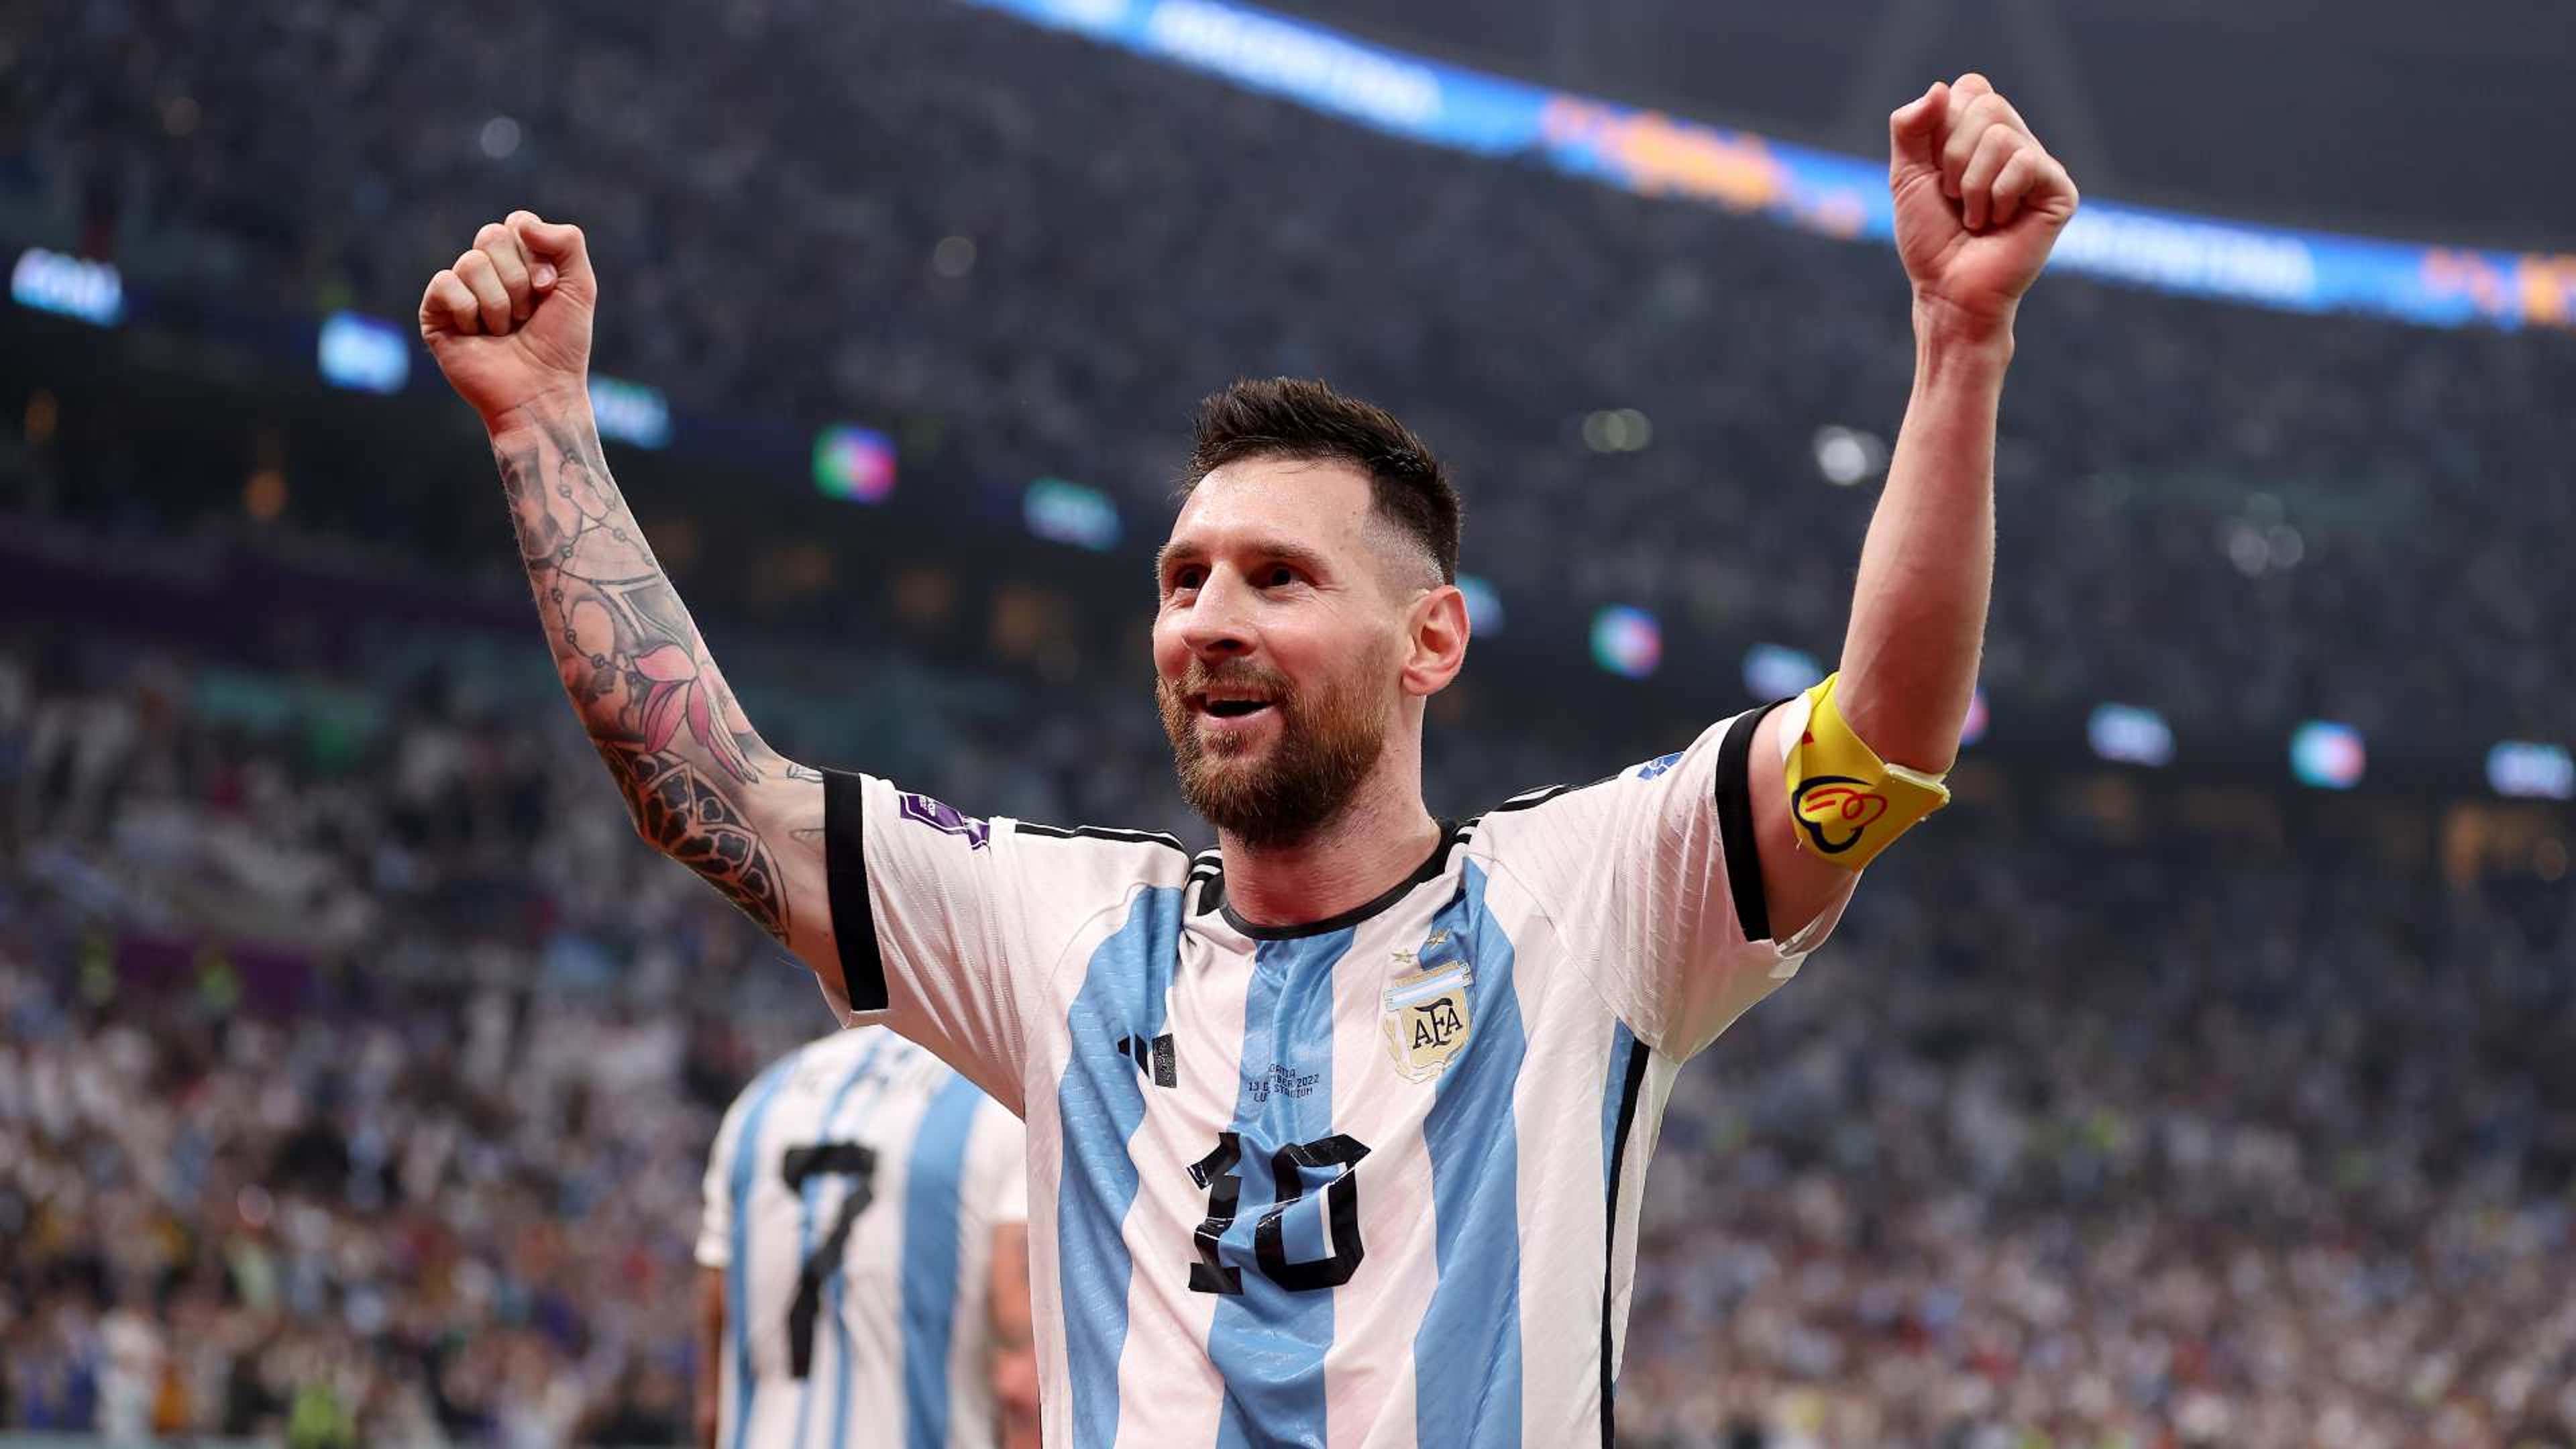 Argentina Wins the 2022 World Cup, Defeating France